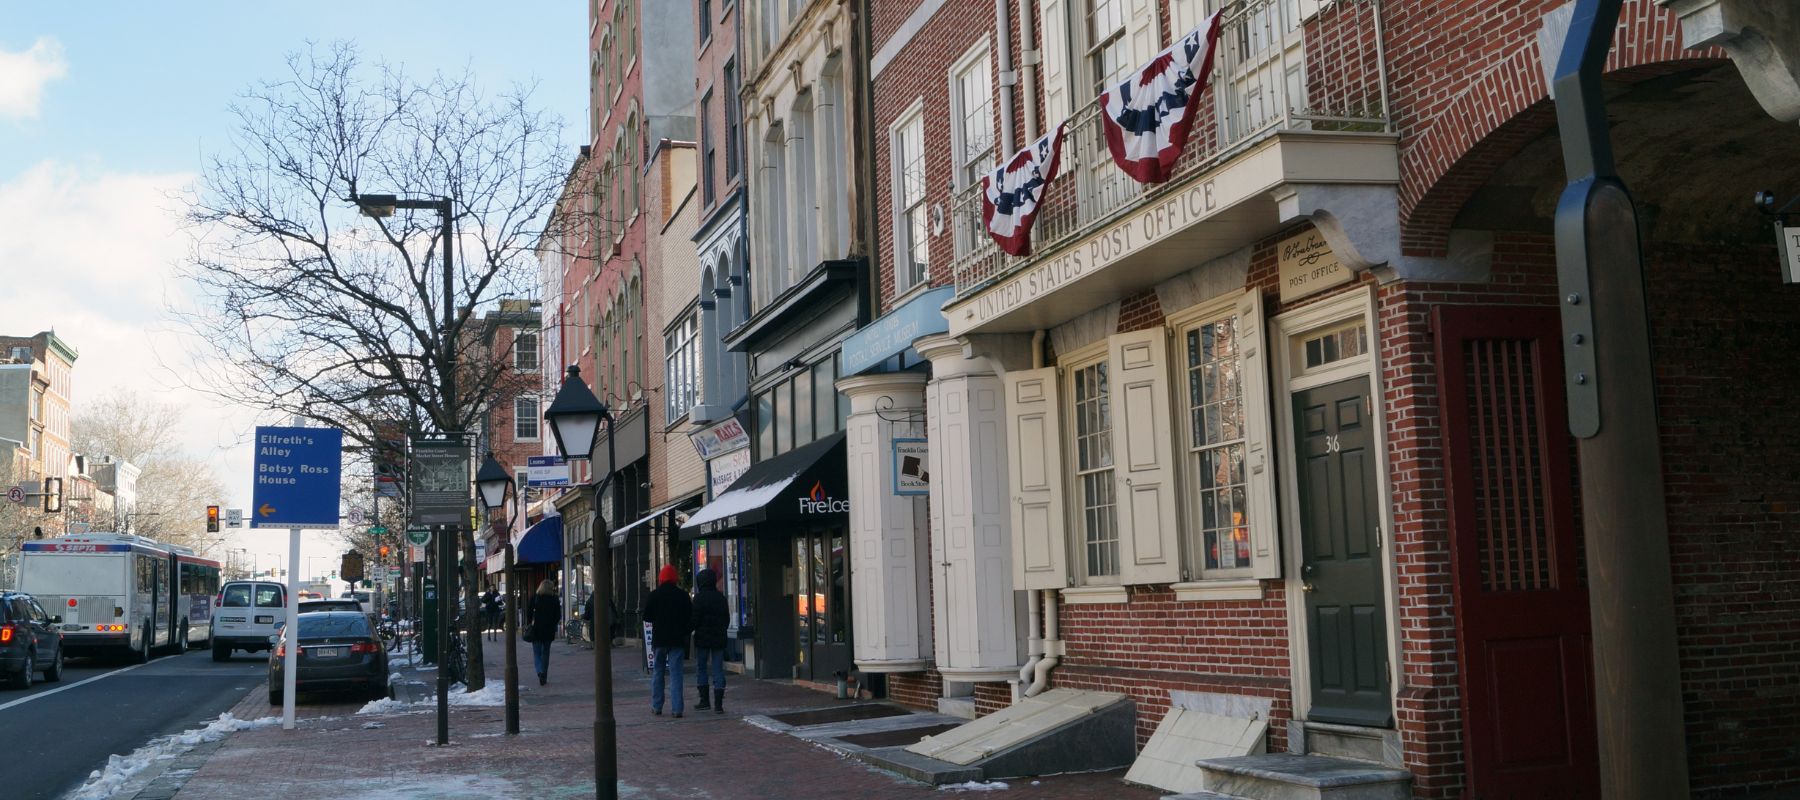 A panoramic view of a historic city street with traditional brick buildings, American flags, and a clear winter sky. Pedestrians and vehicles suggest everyday urban activity, while the signage points towards landmarks like the Betsy Ross House, infusing the scene with a sense of heritage and continuity in north wales pennsylvania